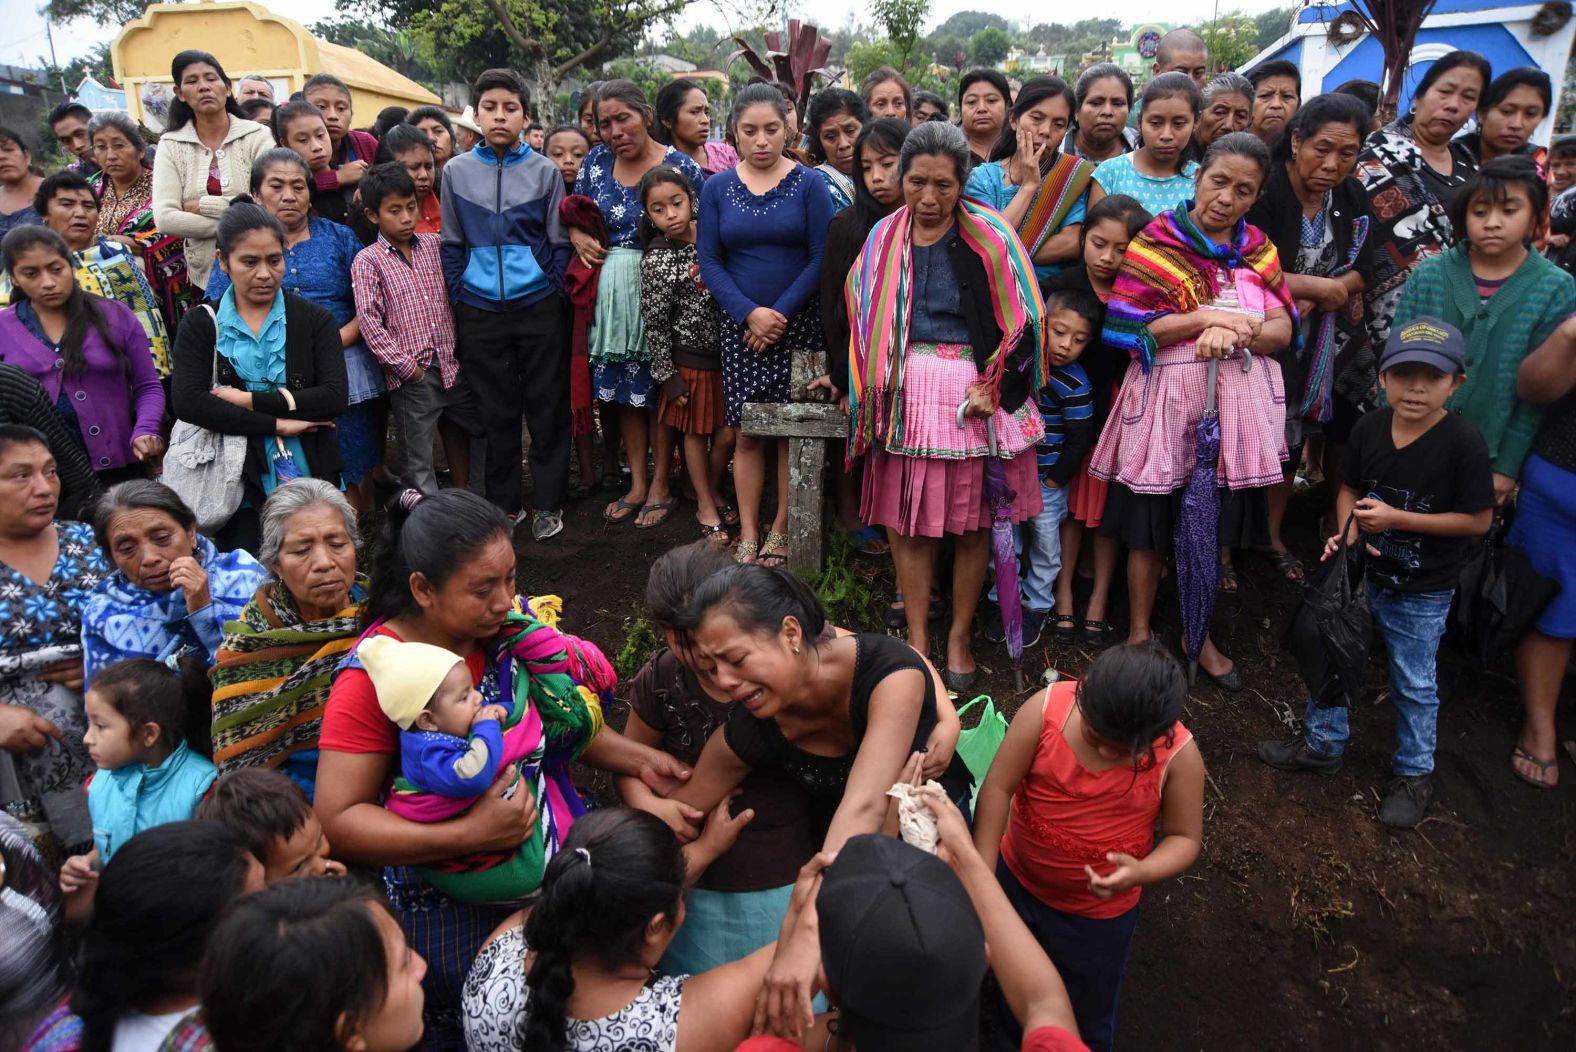 Relatives of 20-year-old victim Erick Rivas mourn his death during his funeral in Alotenango on June 6.